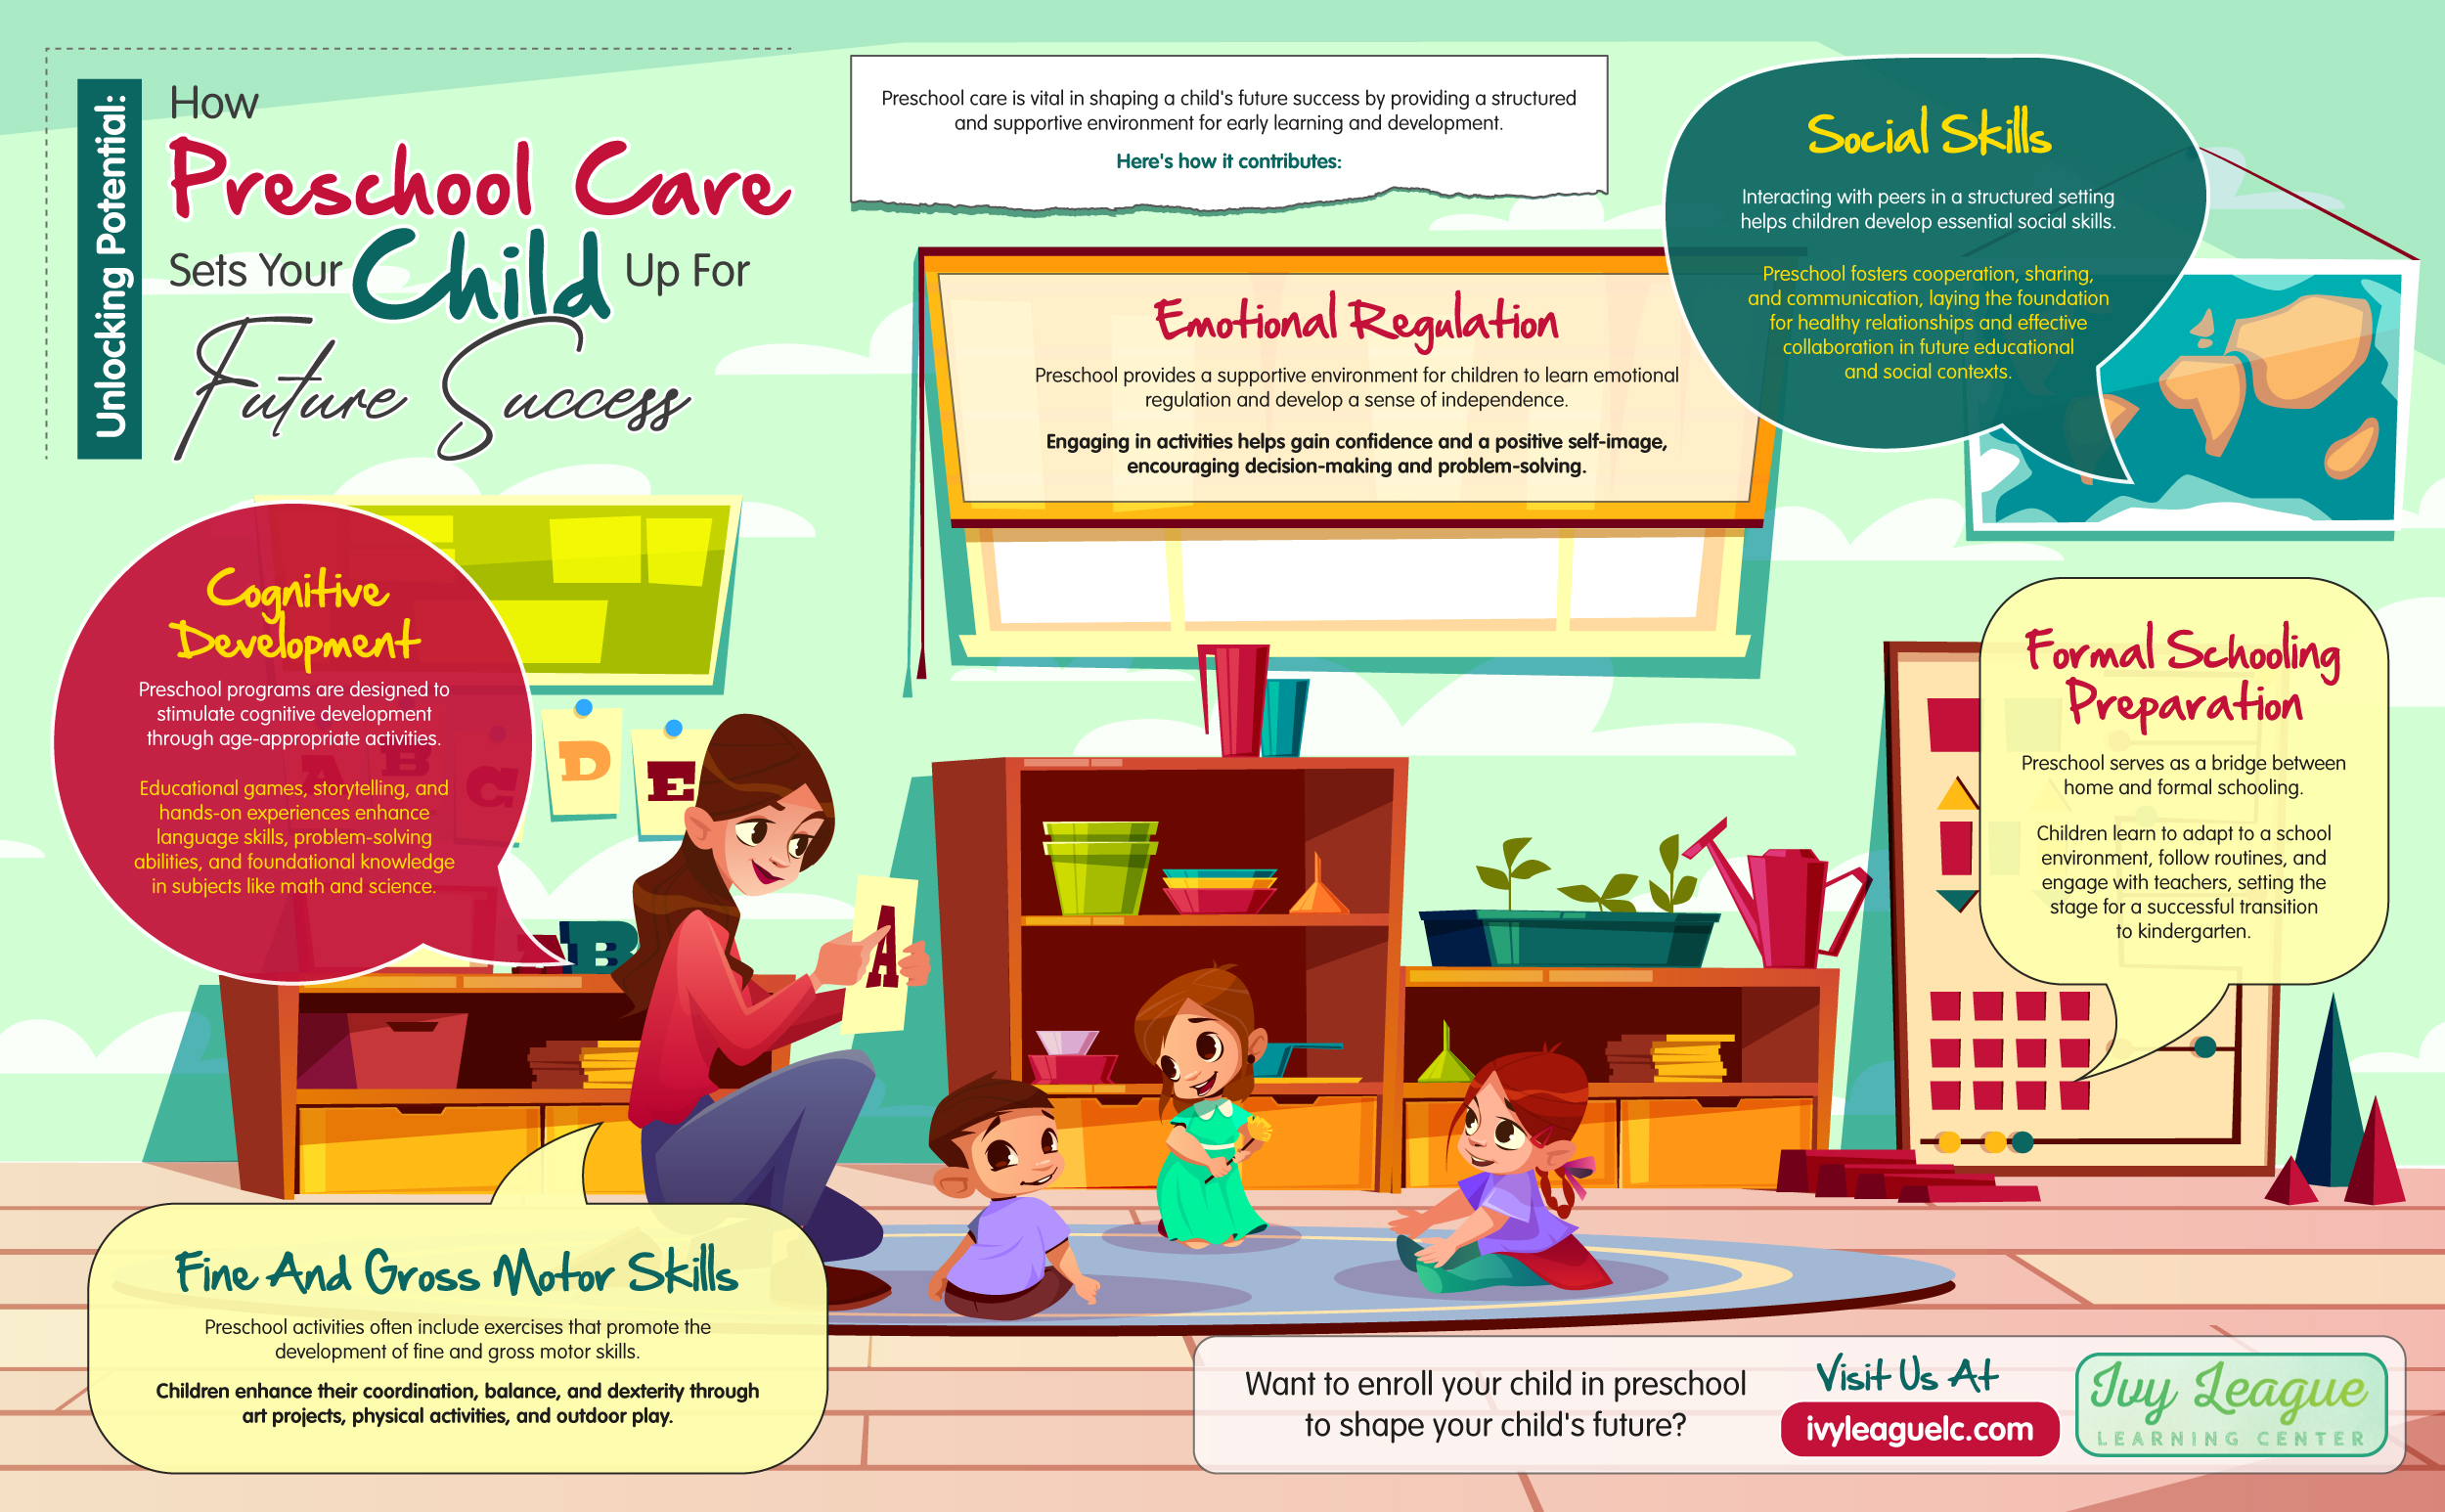 Unlocking Potential: How Preschool Care Sets Your Child Up For Future Success